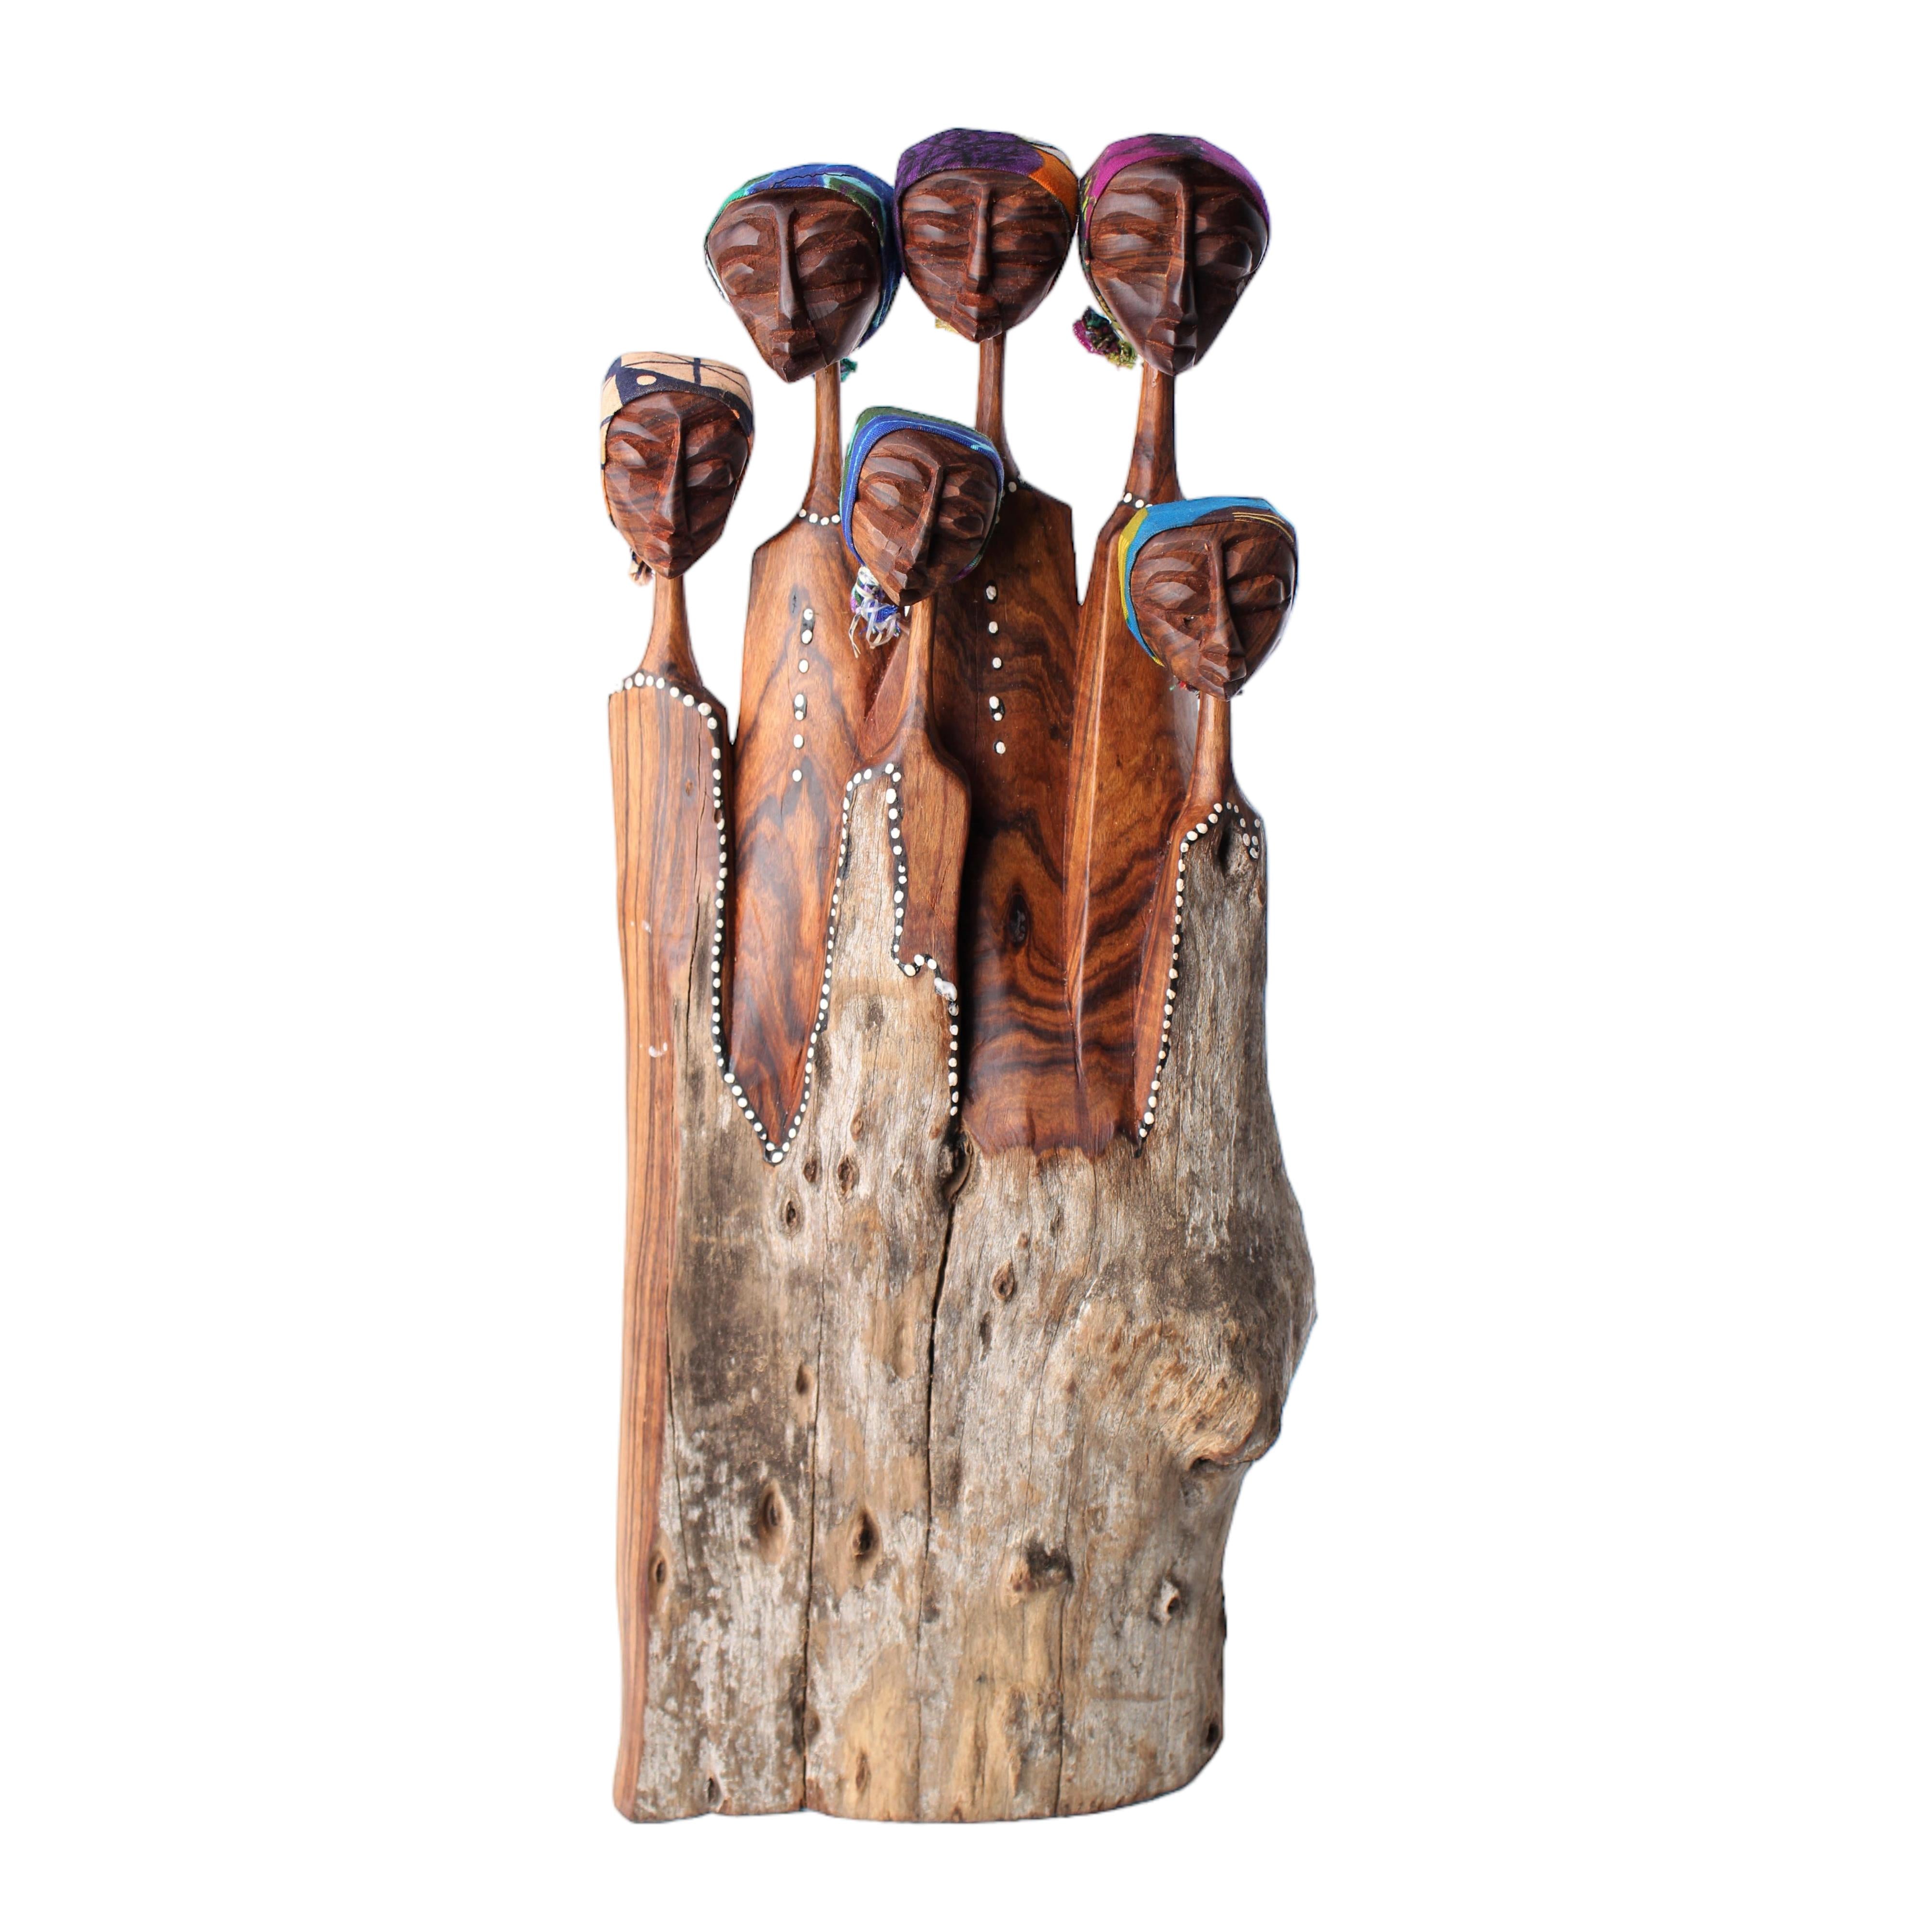 Makonde Tribe Wooden Families ~16.9" Tall - Wooden Families